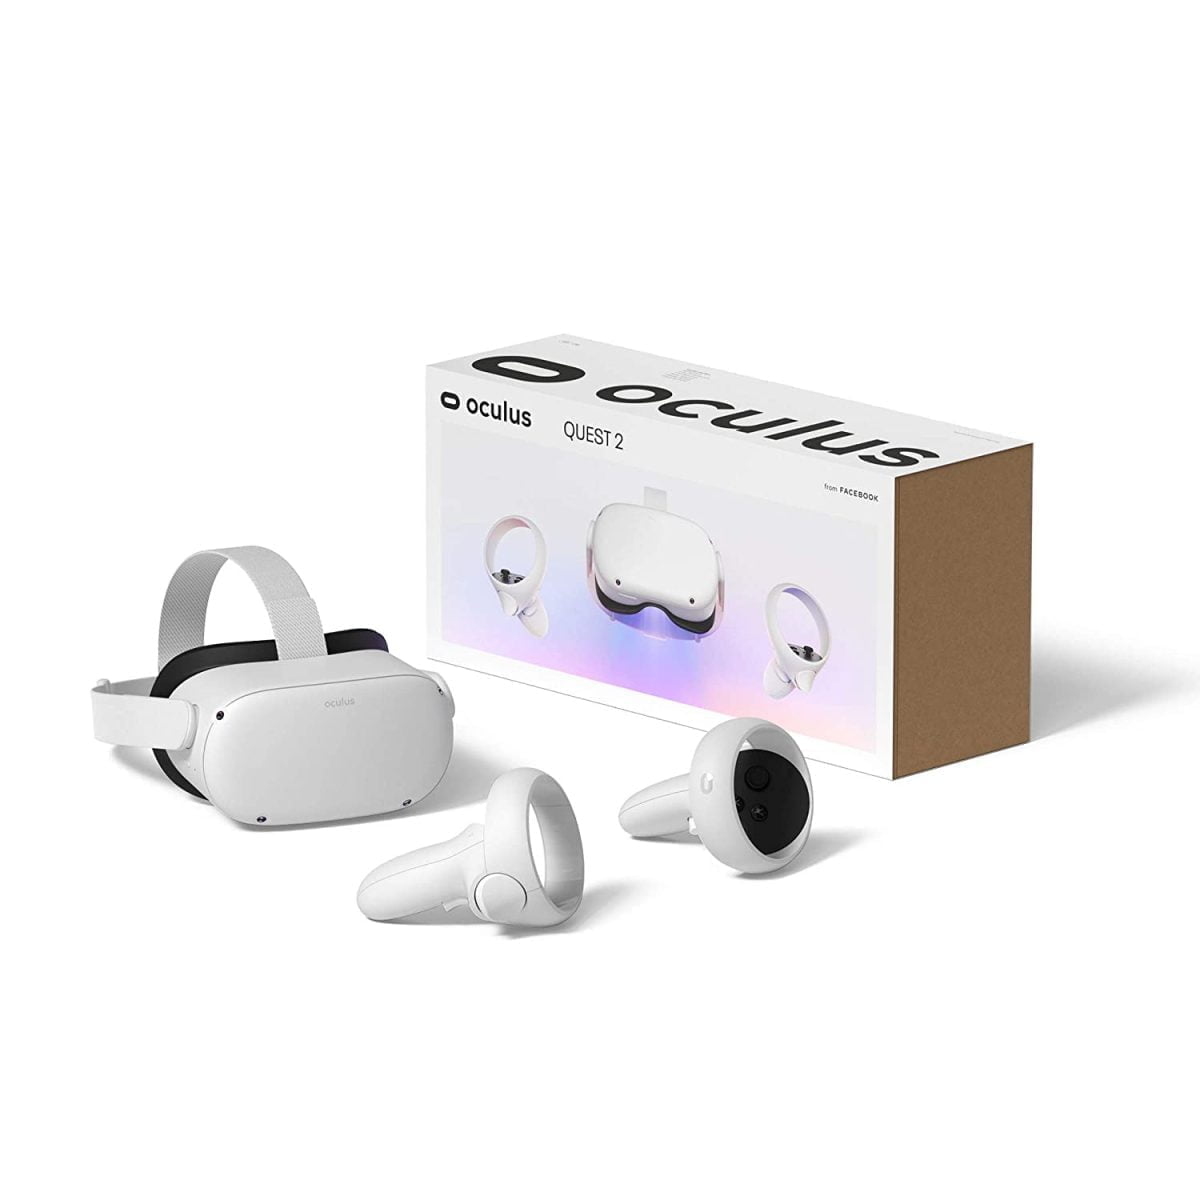 614Rzogtxl. Sl1500 Oculus &Lt;H1&Gt;&Lt;/H1&Gt; &Lt;H1&Gt;Meta Quest 2 256 Gb Advanced All-In-One Virtual Reality Headset&Lt;/H1&Gt; Https://Youtu.be/Atvgl9Wojsm &Lt;Ul Class=&Quot;A-Unordered-List A-Vertical A-Spacing-Mini&Quot;&Gt; &Lt;Li&Gt;&Lt;Span Class=&Quot;A-List-Item&Quot;&Gt;Voltage: 100-240 V&Lt;/Span&Gt;&Lt;/Li&Gt; &Lt;Li&Gt;&Lt;Span Class=&Quot;A-List-Item&Quot;&Gt;Next-Level Hardware - Make Every Move Count With A Blazing-Fast Processor And Our Highest-Resolution Display&Lt;/Span&Gt;&Lt;/Li&Gt; &Lt;Li&Gt;&Lt;Span Class=&Quot;A-List-Item&Quot;&Gt;All-In-One Gaming - With Backward Compatibility, You Can Explore New Titles And Old Favorites In The Expansive Quest Content Library&Lt;/Span&Gt;&Lt;/Li&Gt; &Lt;Li&Gt;&Lt;Span Class=&Quot;A-List-Item&Quot;&Gt;Immersive Entertainment - Get The Best Seat In The House To Live Concerts, Groundbreaking Films, Exclusive Events And More&Lt;/Span&Gt;&Lt;/Li&Gt; &Lt;Li&Gt;&Lt;Span Class=&Quot;A-List-Item&Quot;&Gt;Easy Setup - Just Open The Box, Set Up With The Smartphone App And Jump Into Vr. No Pc Or Console Needed. Requires Wireless Internet Access And The Oculus App (Free Download) To Set Up Device Premium Display - Catch Every Detail With A Stunning Display That Features 50% More Pixels Than The Original Quest Ultimate Control - Redesigned Oculus Touch Controllers Transport Your Movements Directly Into Vr With Intuitive Controls Pc Vr Compatible - Step Into Incredible Oculus Rift Titles By Connecting An Oculus Link Cable To A Compatible Gaming Pc. Oculus Link Cable Sold Separately 3D Cinematic Sound - Hear In All Directions With Built-In Speakers That Deliver Cinematic 3D Positional Audio&Lt;/Span&Gt;&Lt;/Li&Gt; &Lt;/Ul&Gt; &Nbsp; Meta Quest 2 Meta Quest 2 256 Gb Advanced All-In-One Virtual Reality Headset